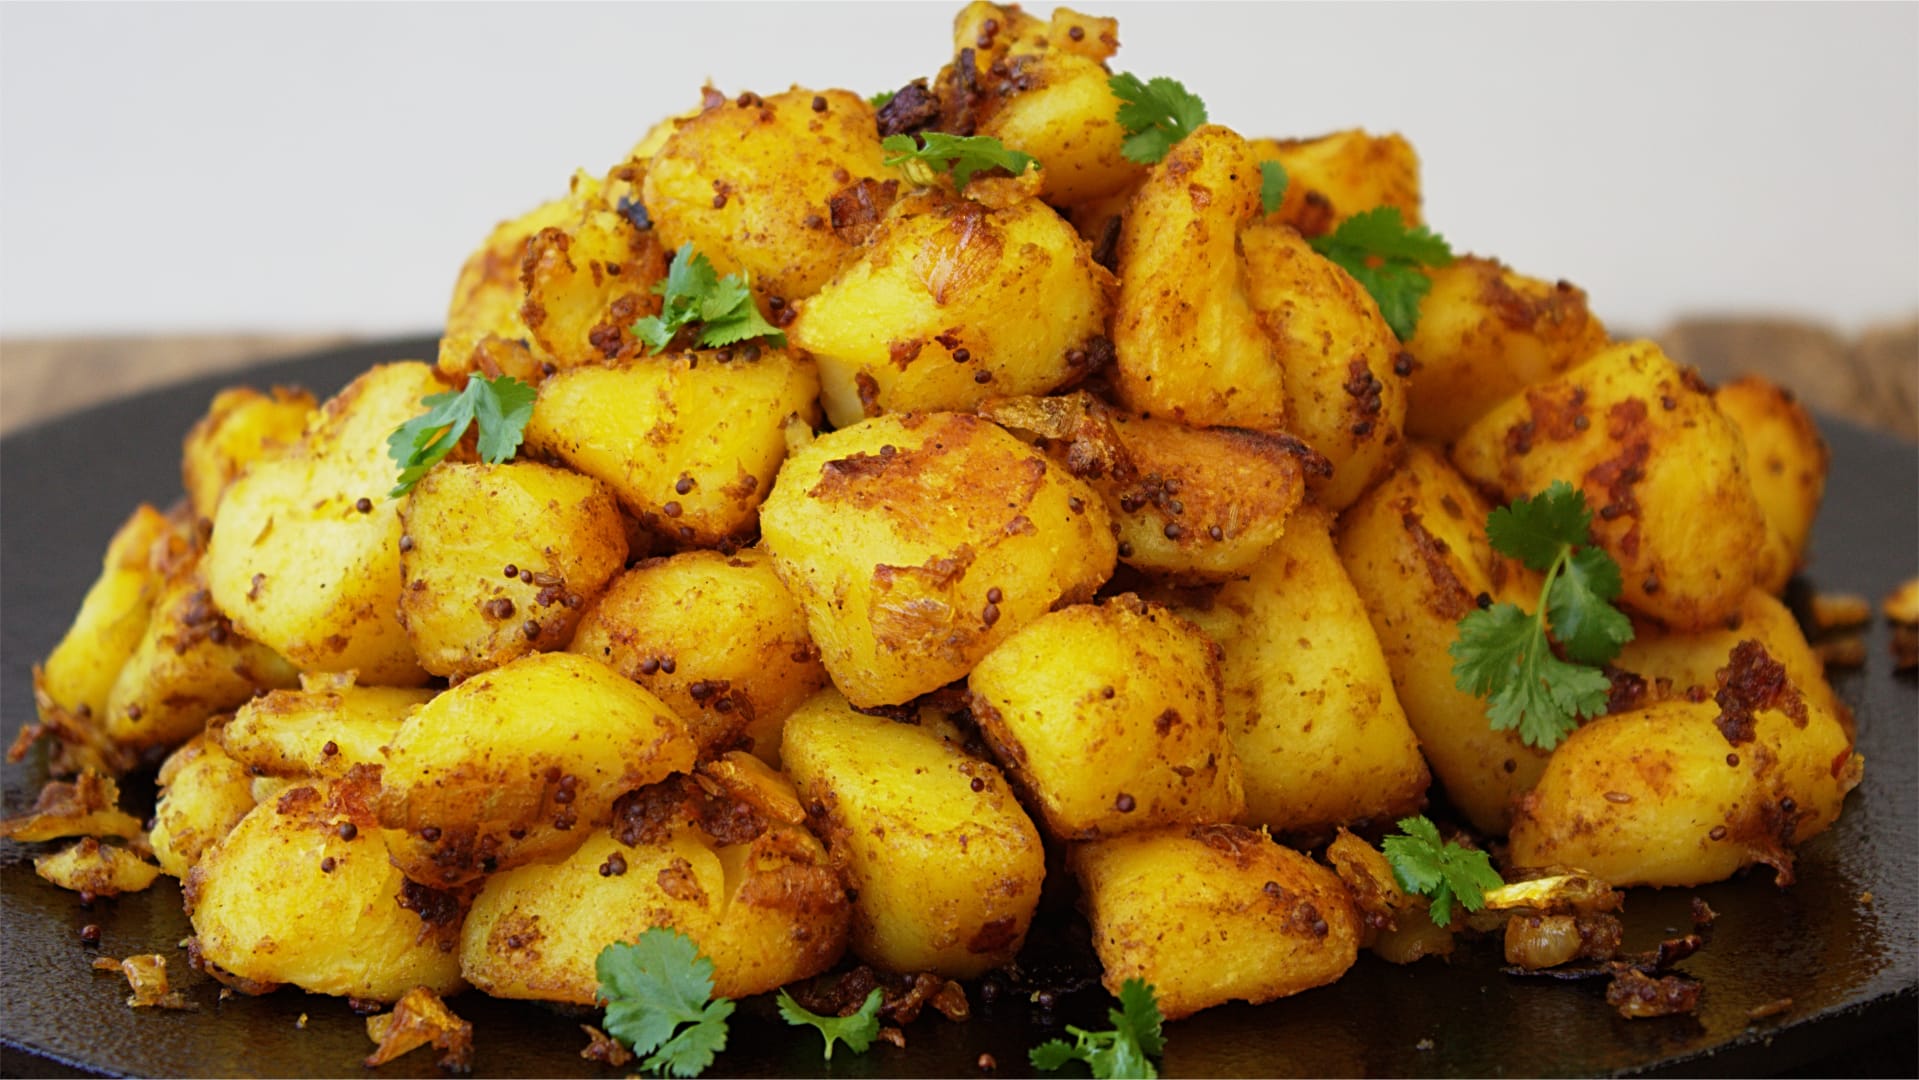 When potatoes turn unsafe to eat - Times of India